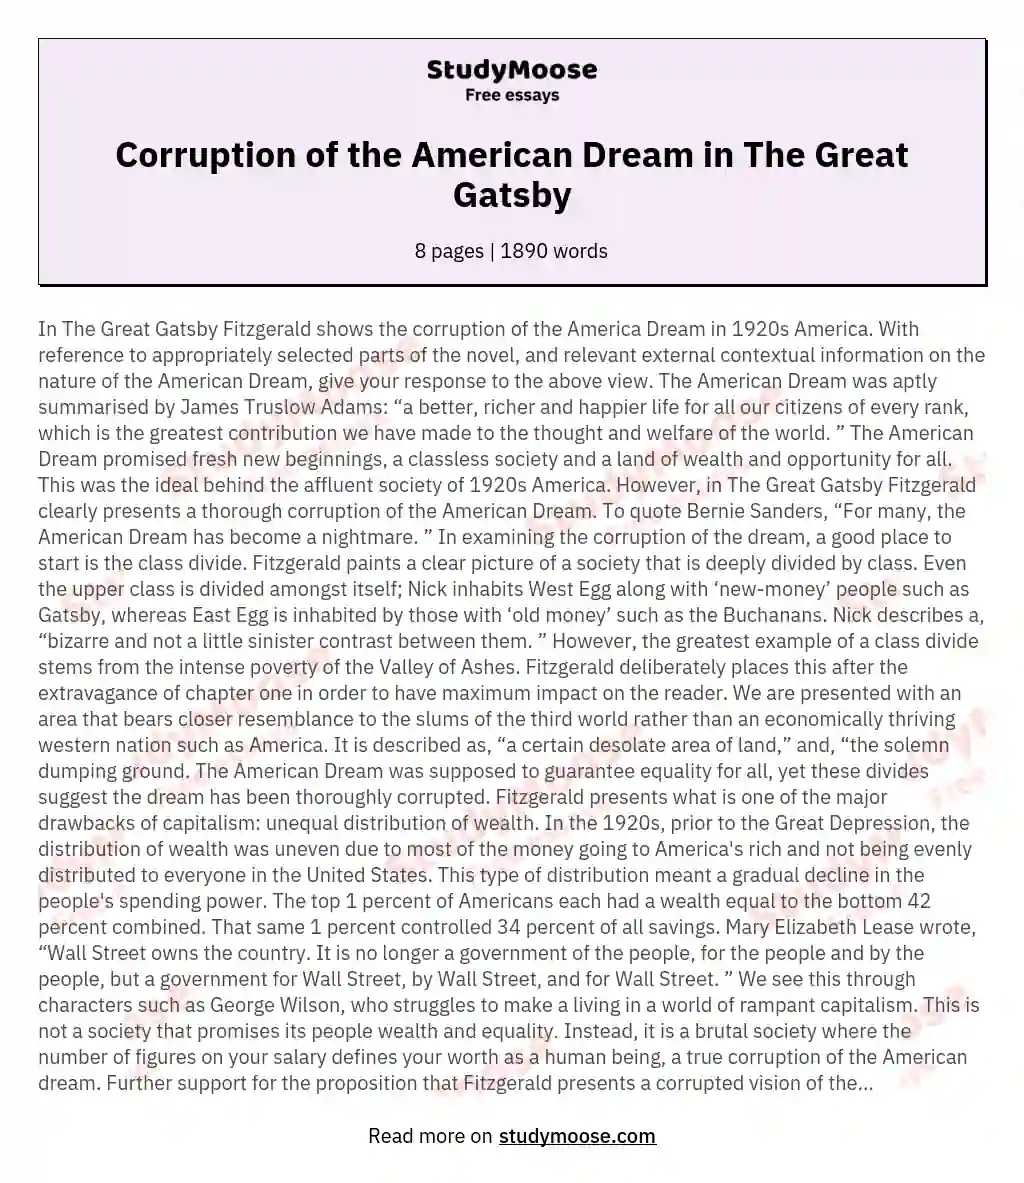 Corruption of the American Dream in The Great Gatsby essay